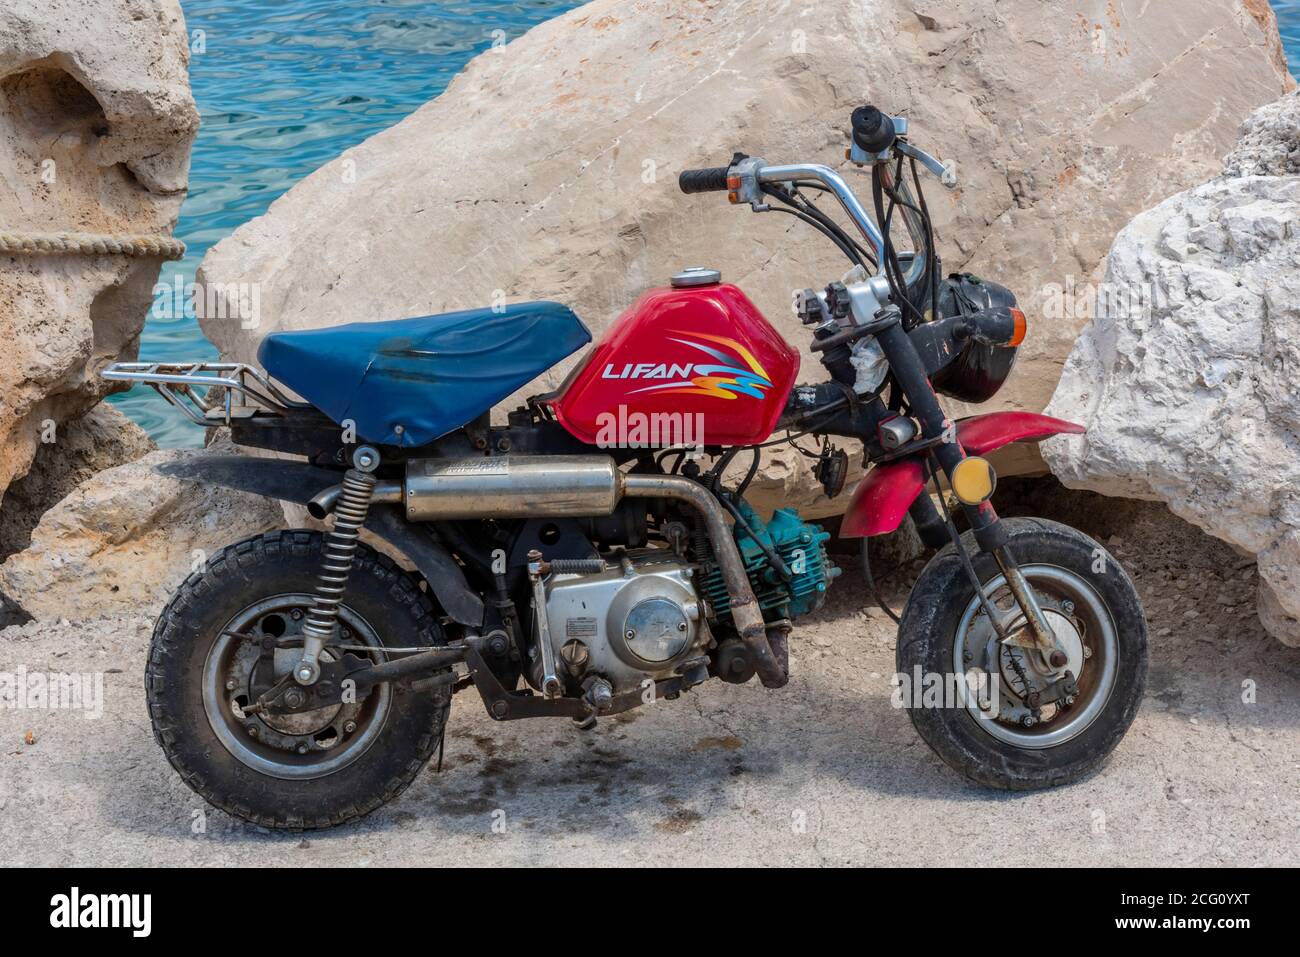 a mini moto motorcycle with a red petrol tank leaning on some rocks at the  seaside in greece Stock Photo - Alamy